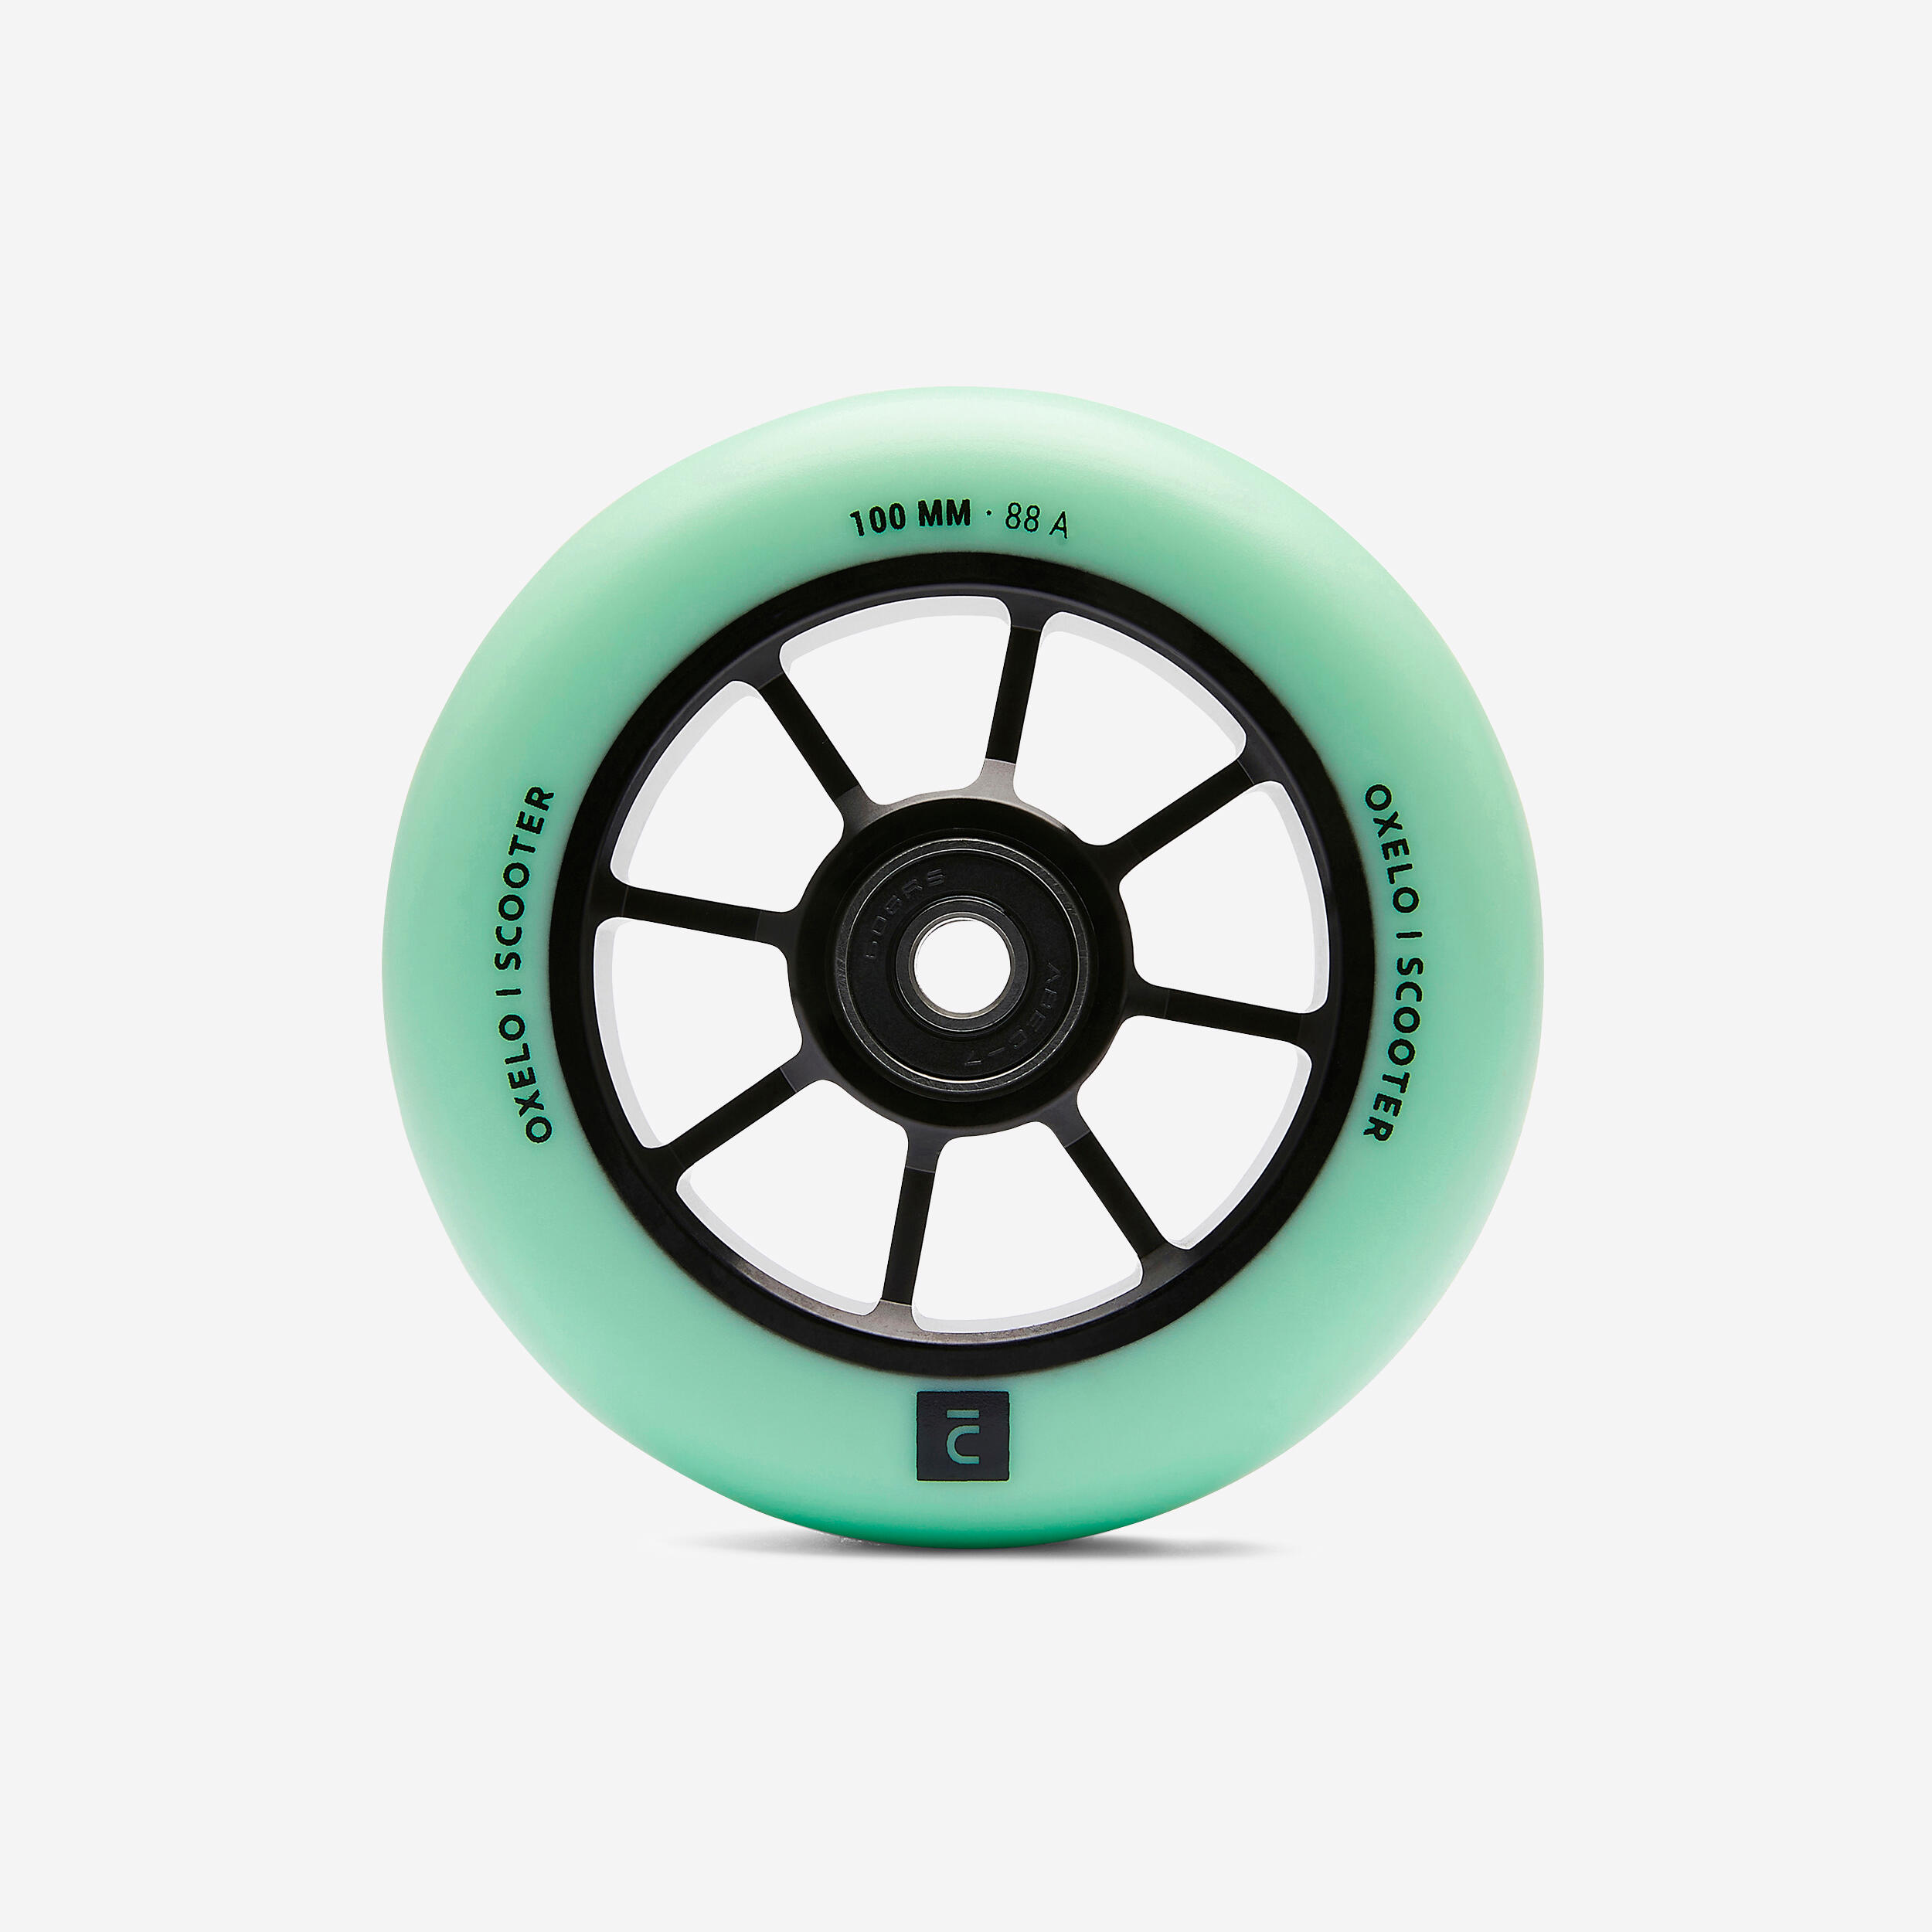 OXELO 100 mm Freestyle Wheel with Black Alu Rim & Green PU85A Rubber